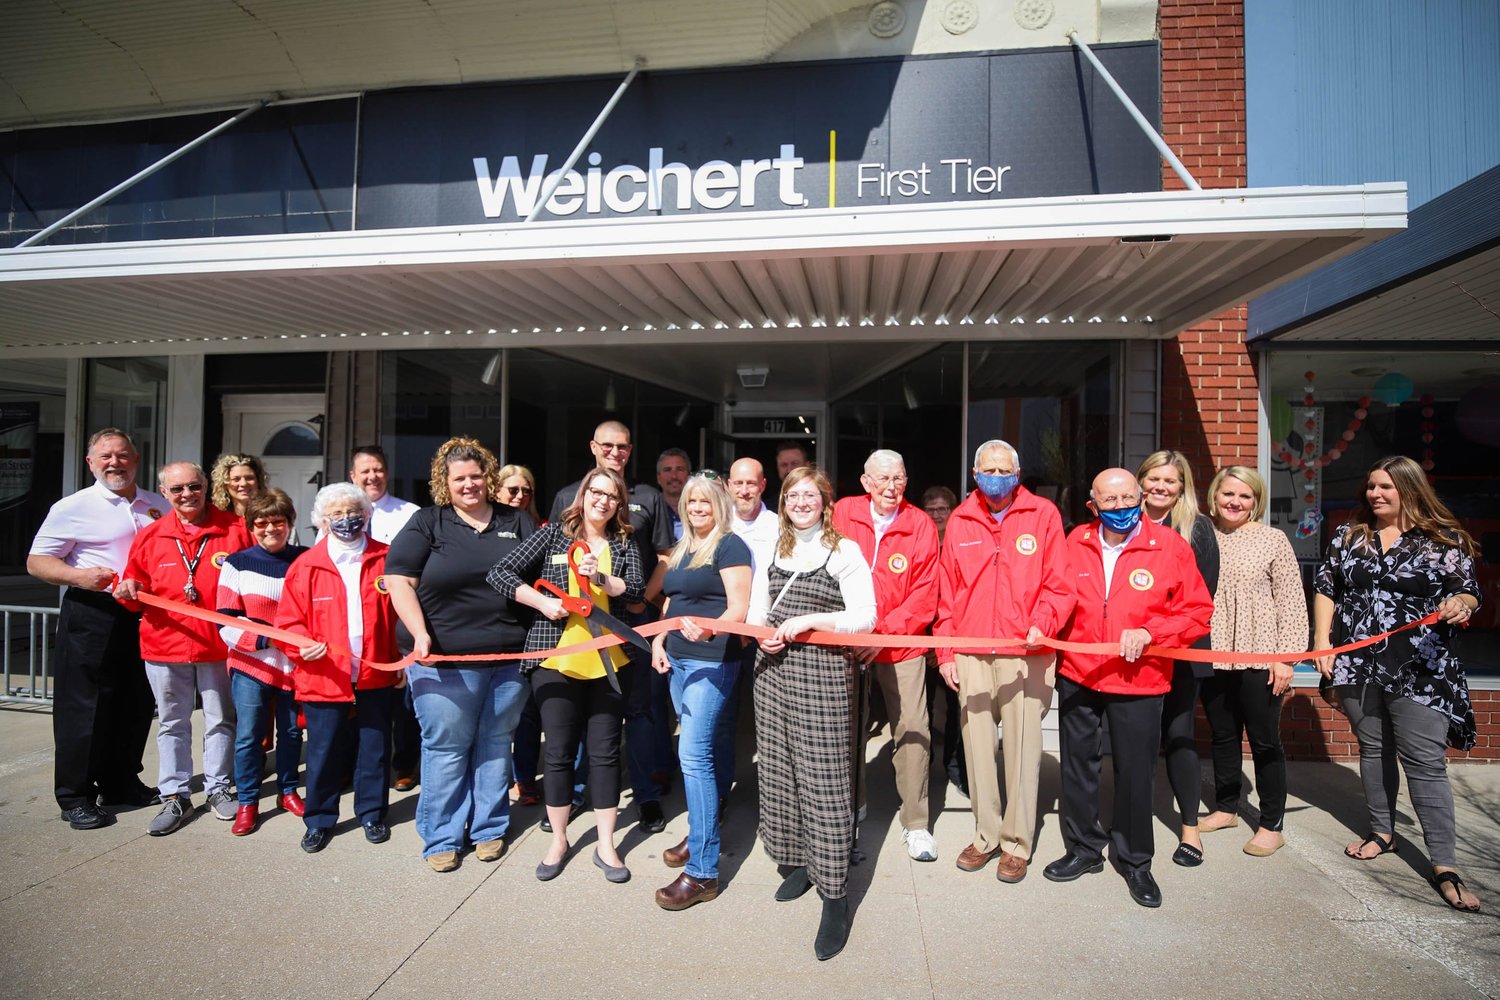 Moberly Area Chamber of Commerce held a ribbon cutting ceremony March 8 to publicly announce the opening of a Weichert Realty, First Tier office location at 417 W. Reed St. Office phone is 660-676-9138.